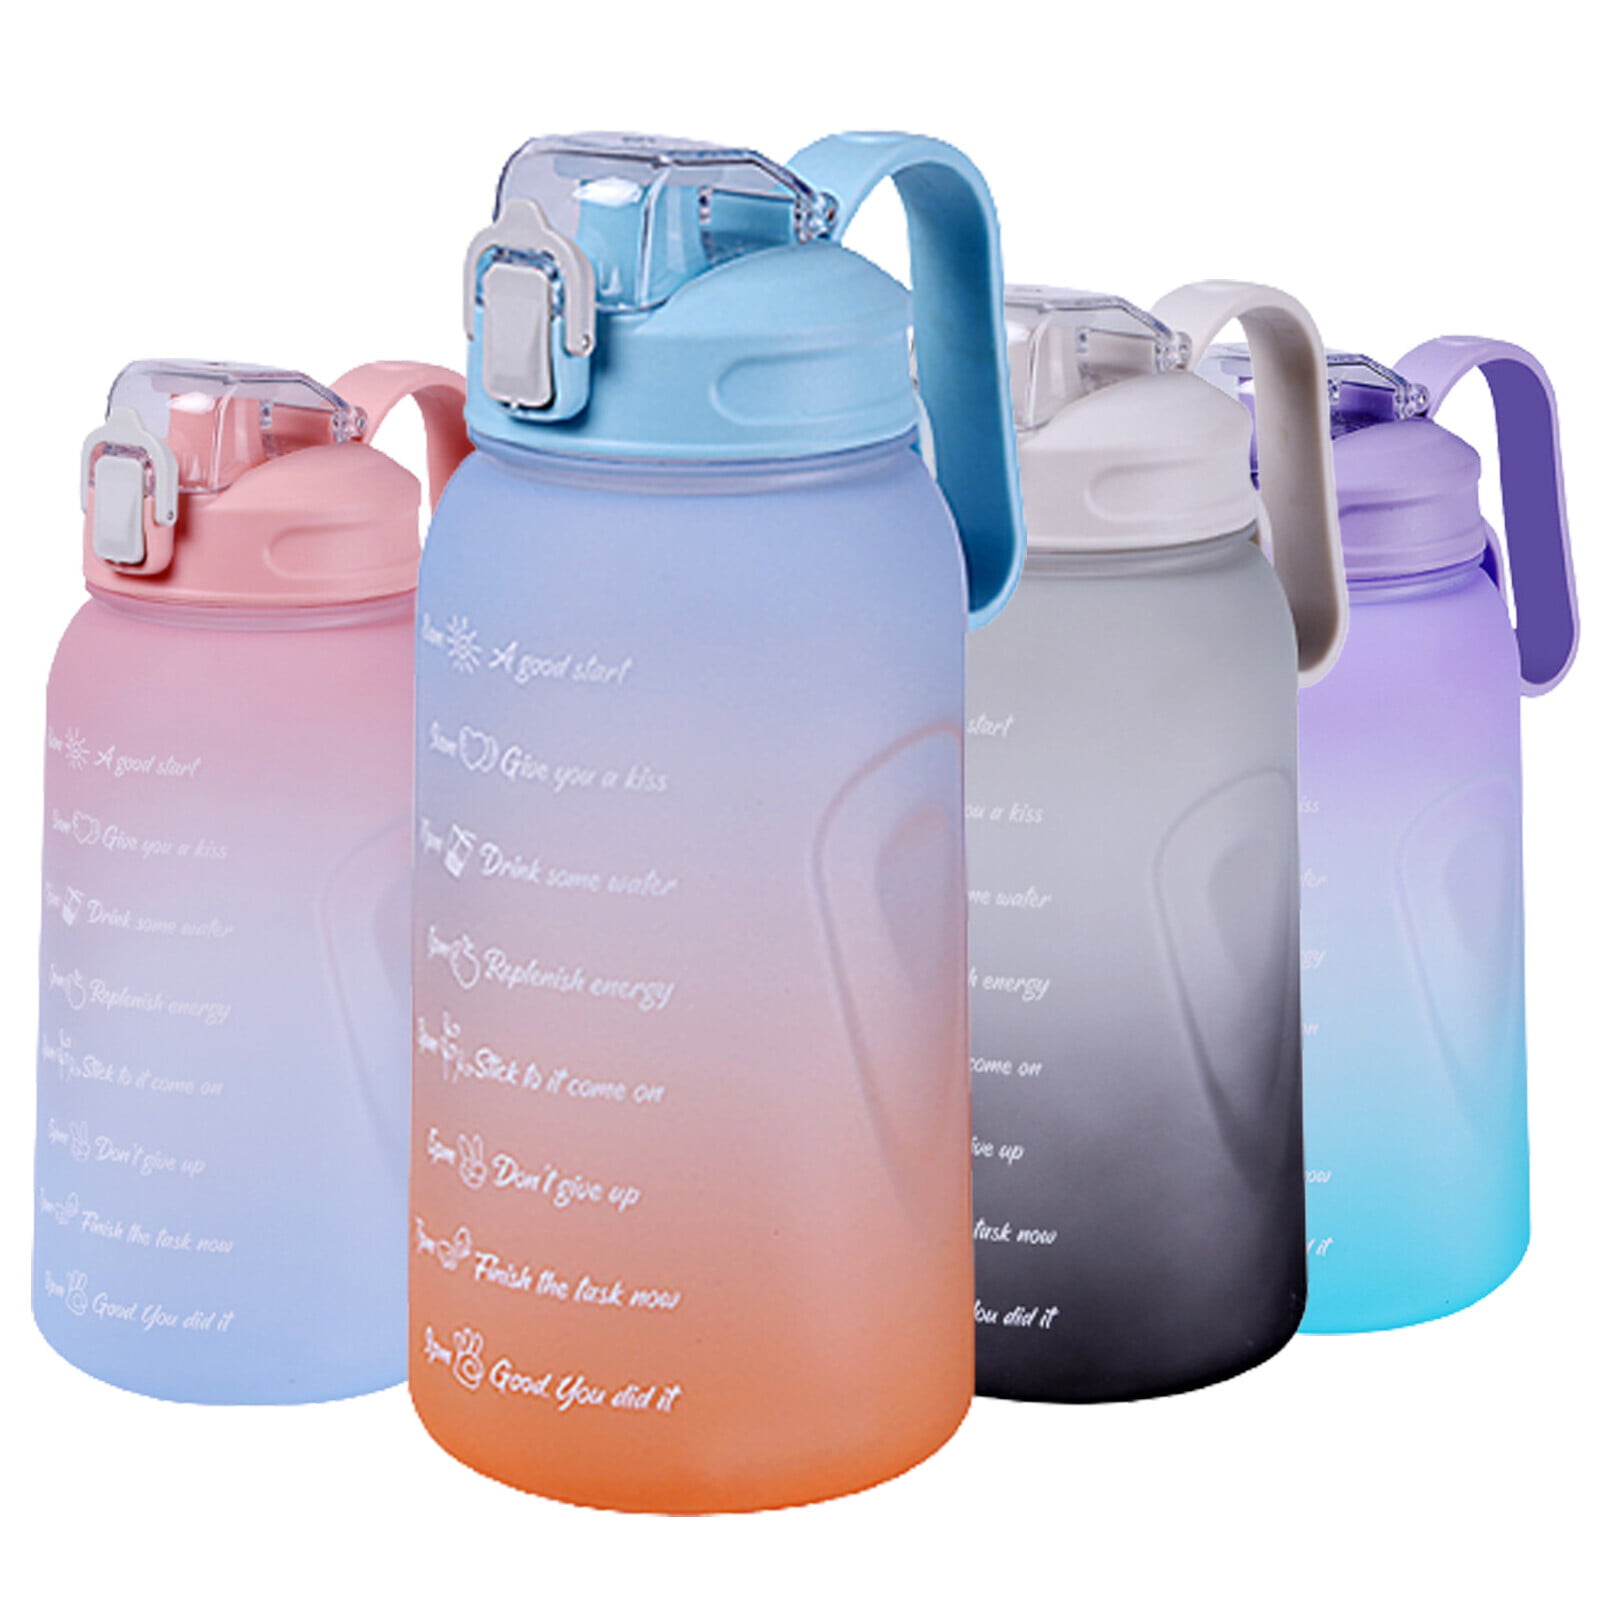 Kawaii Sports Motivational Water Bottle 2l Set Large Capacity Drinking Cup  For Boys And Girls, Ideal For School, Hiking, And Jogging From Stamp2022,  $5.68